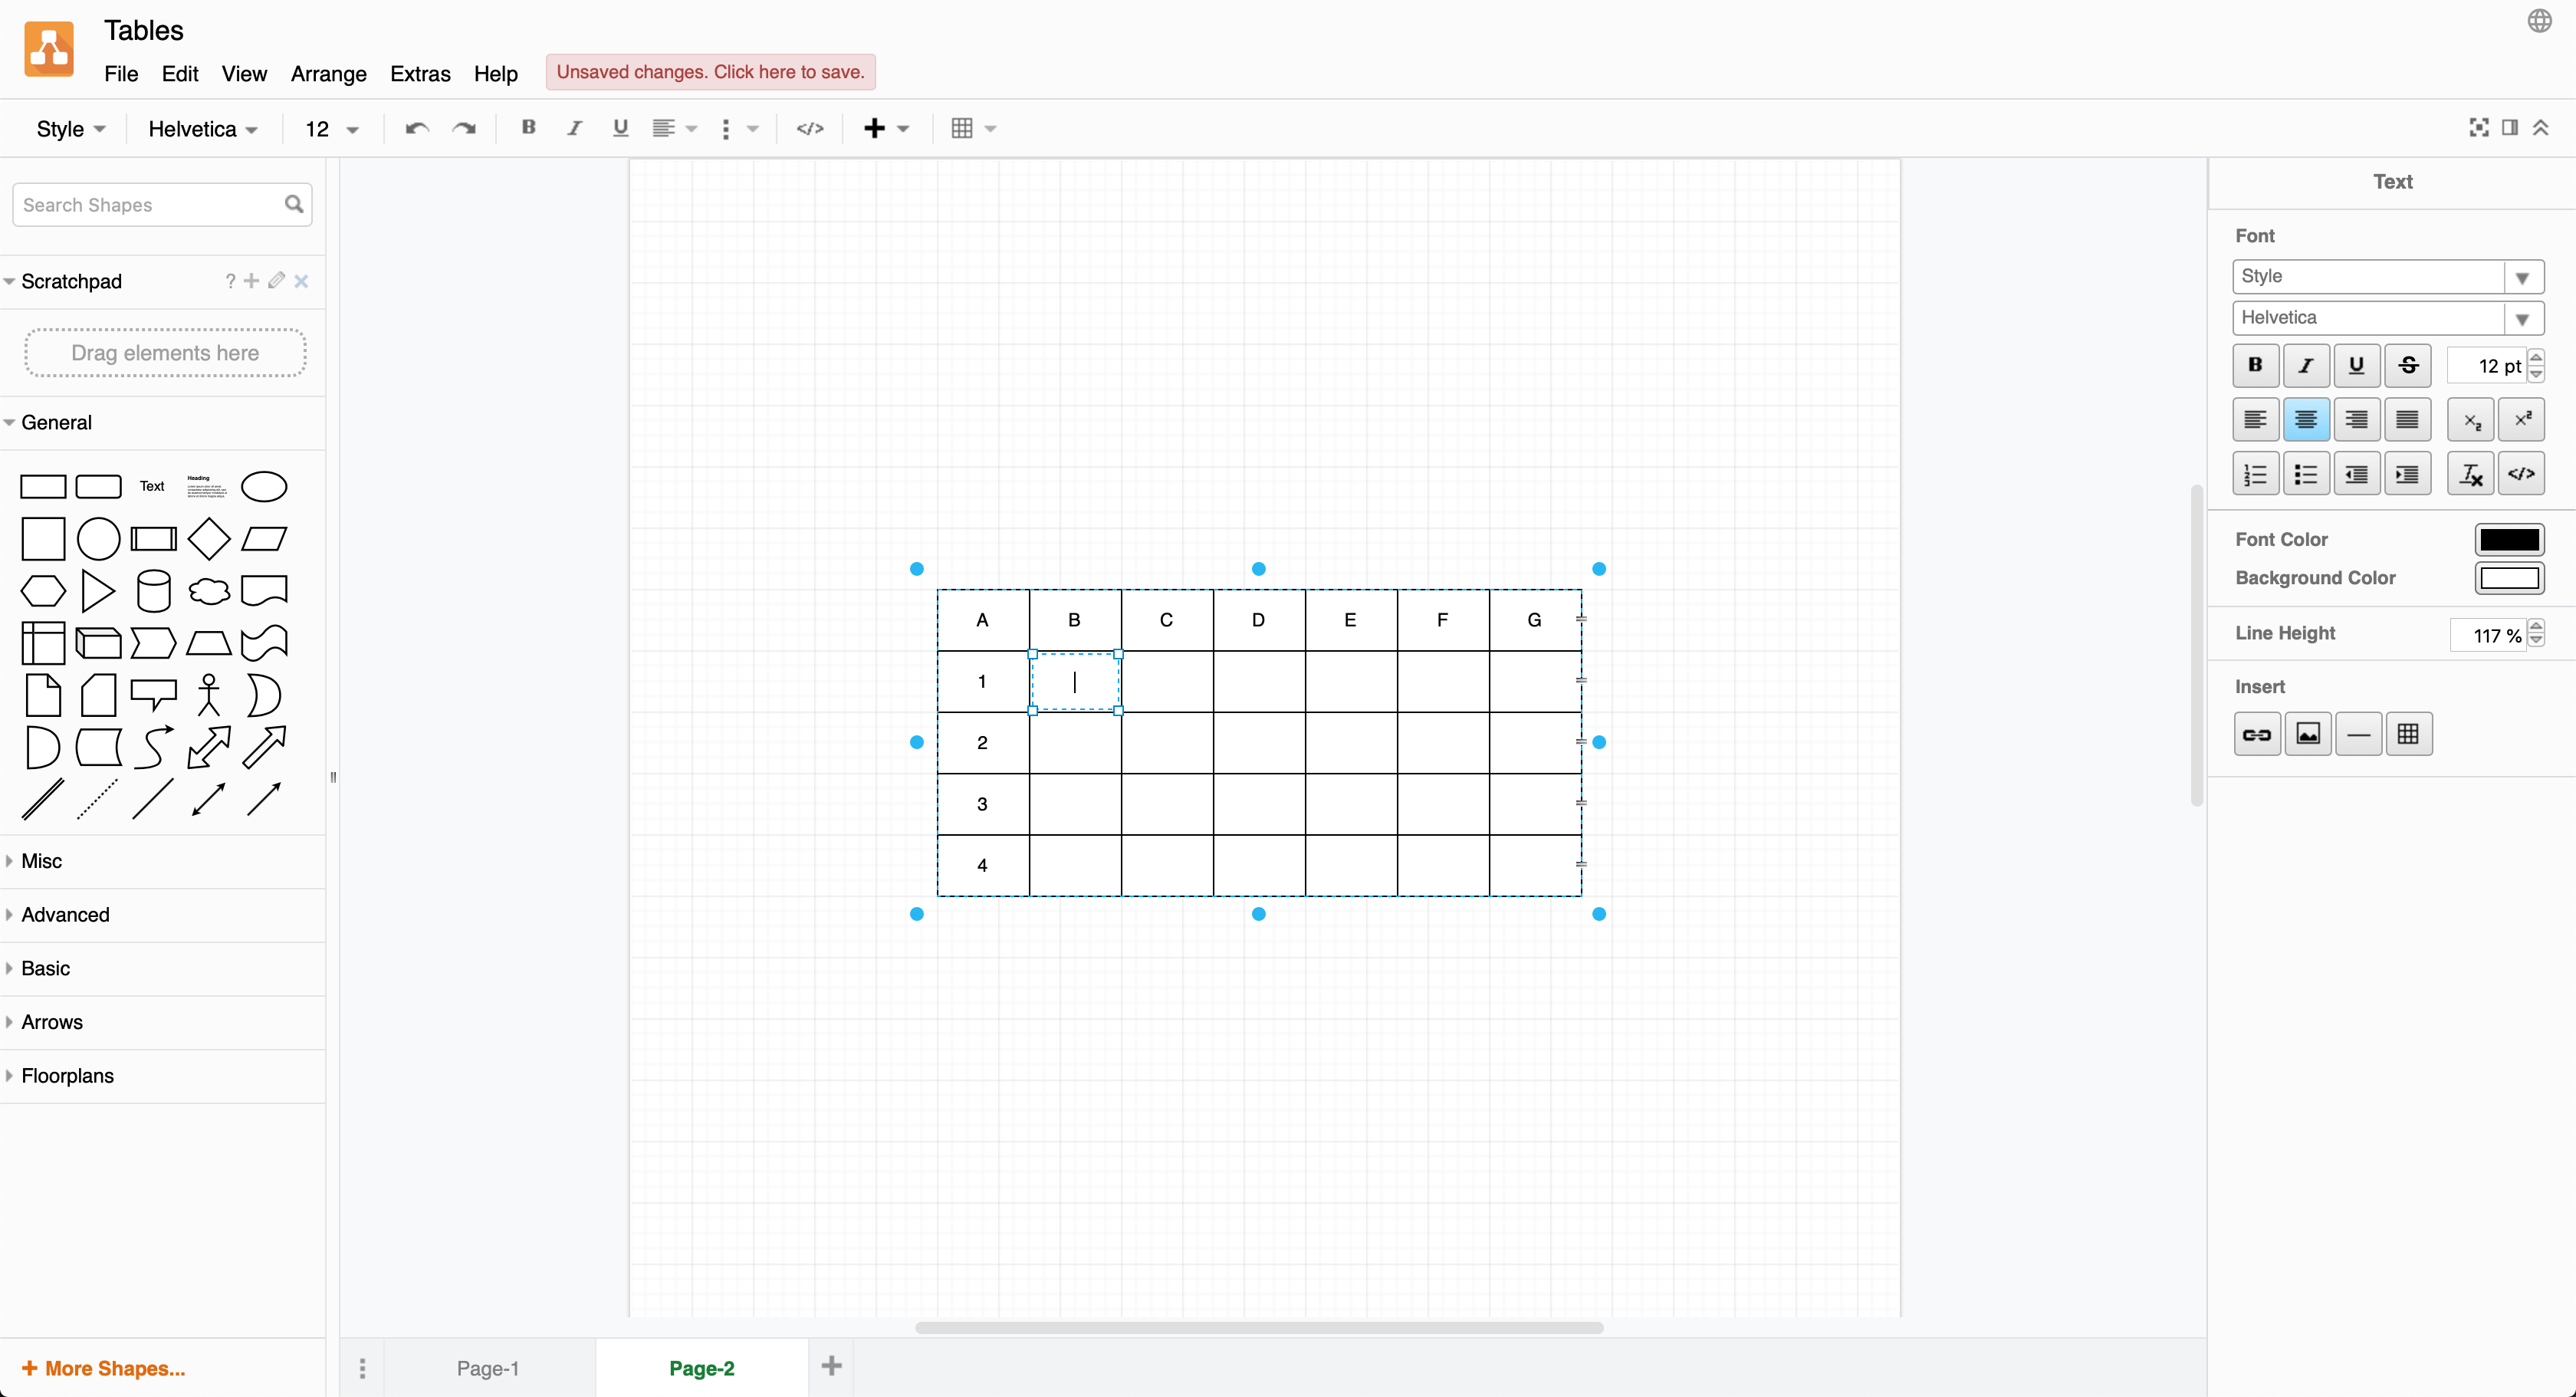 Add text to a selected table cell just like you would a shape label in draw.io